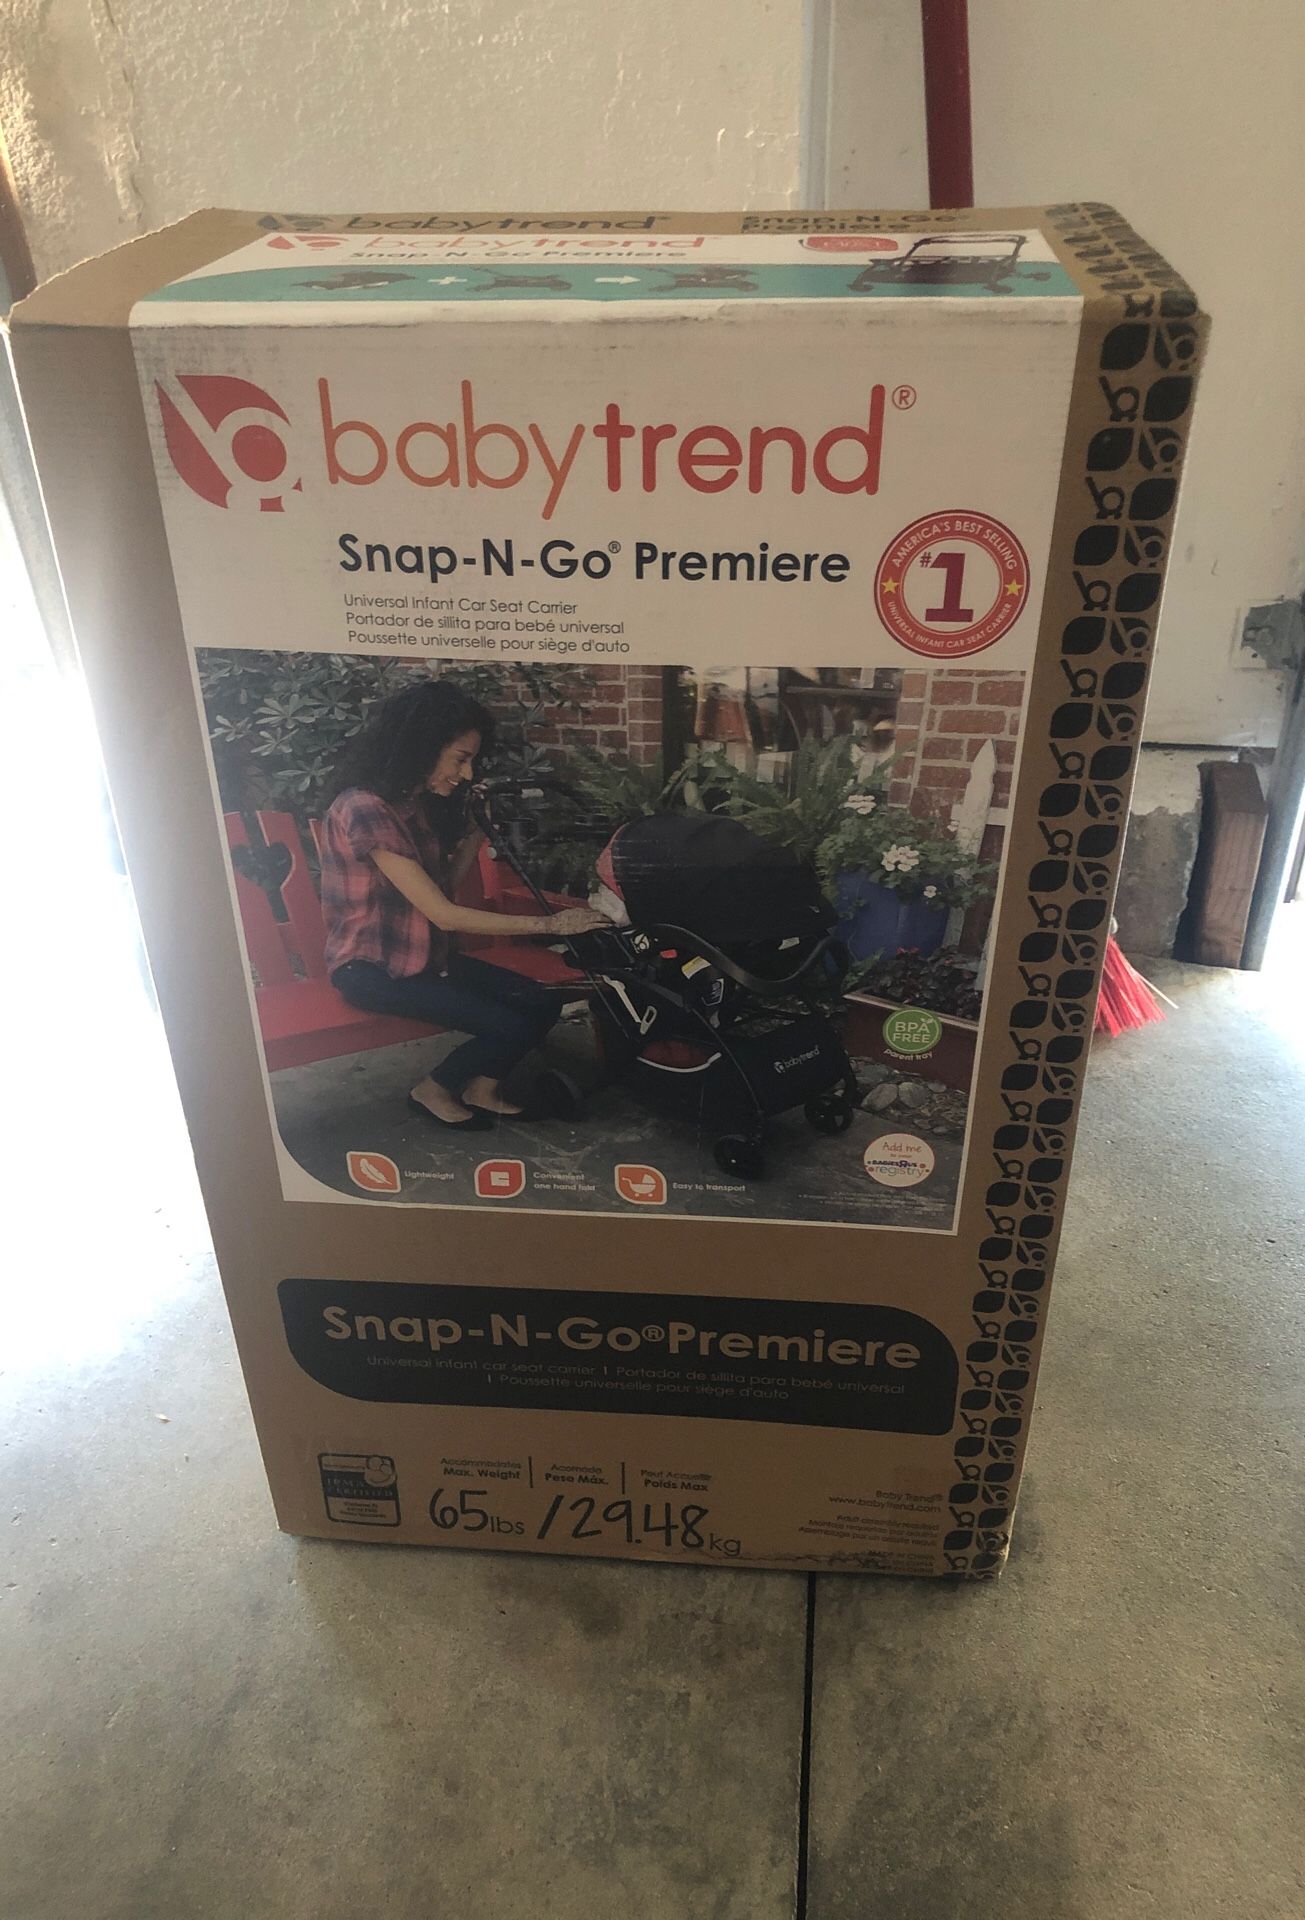 Brand new baby trend universal infant car seat carrier